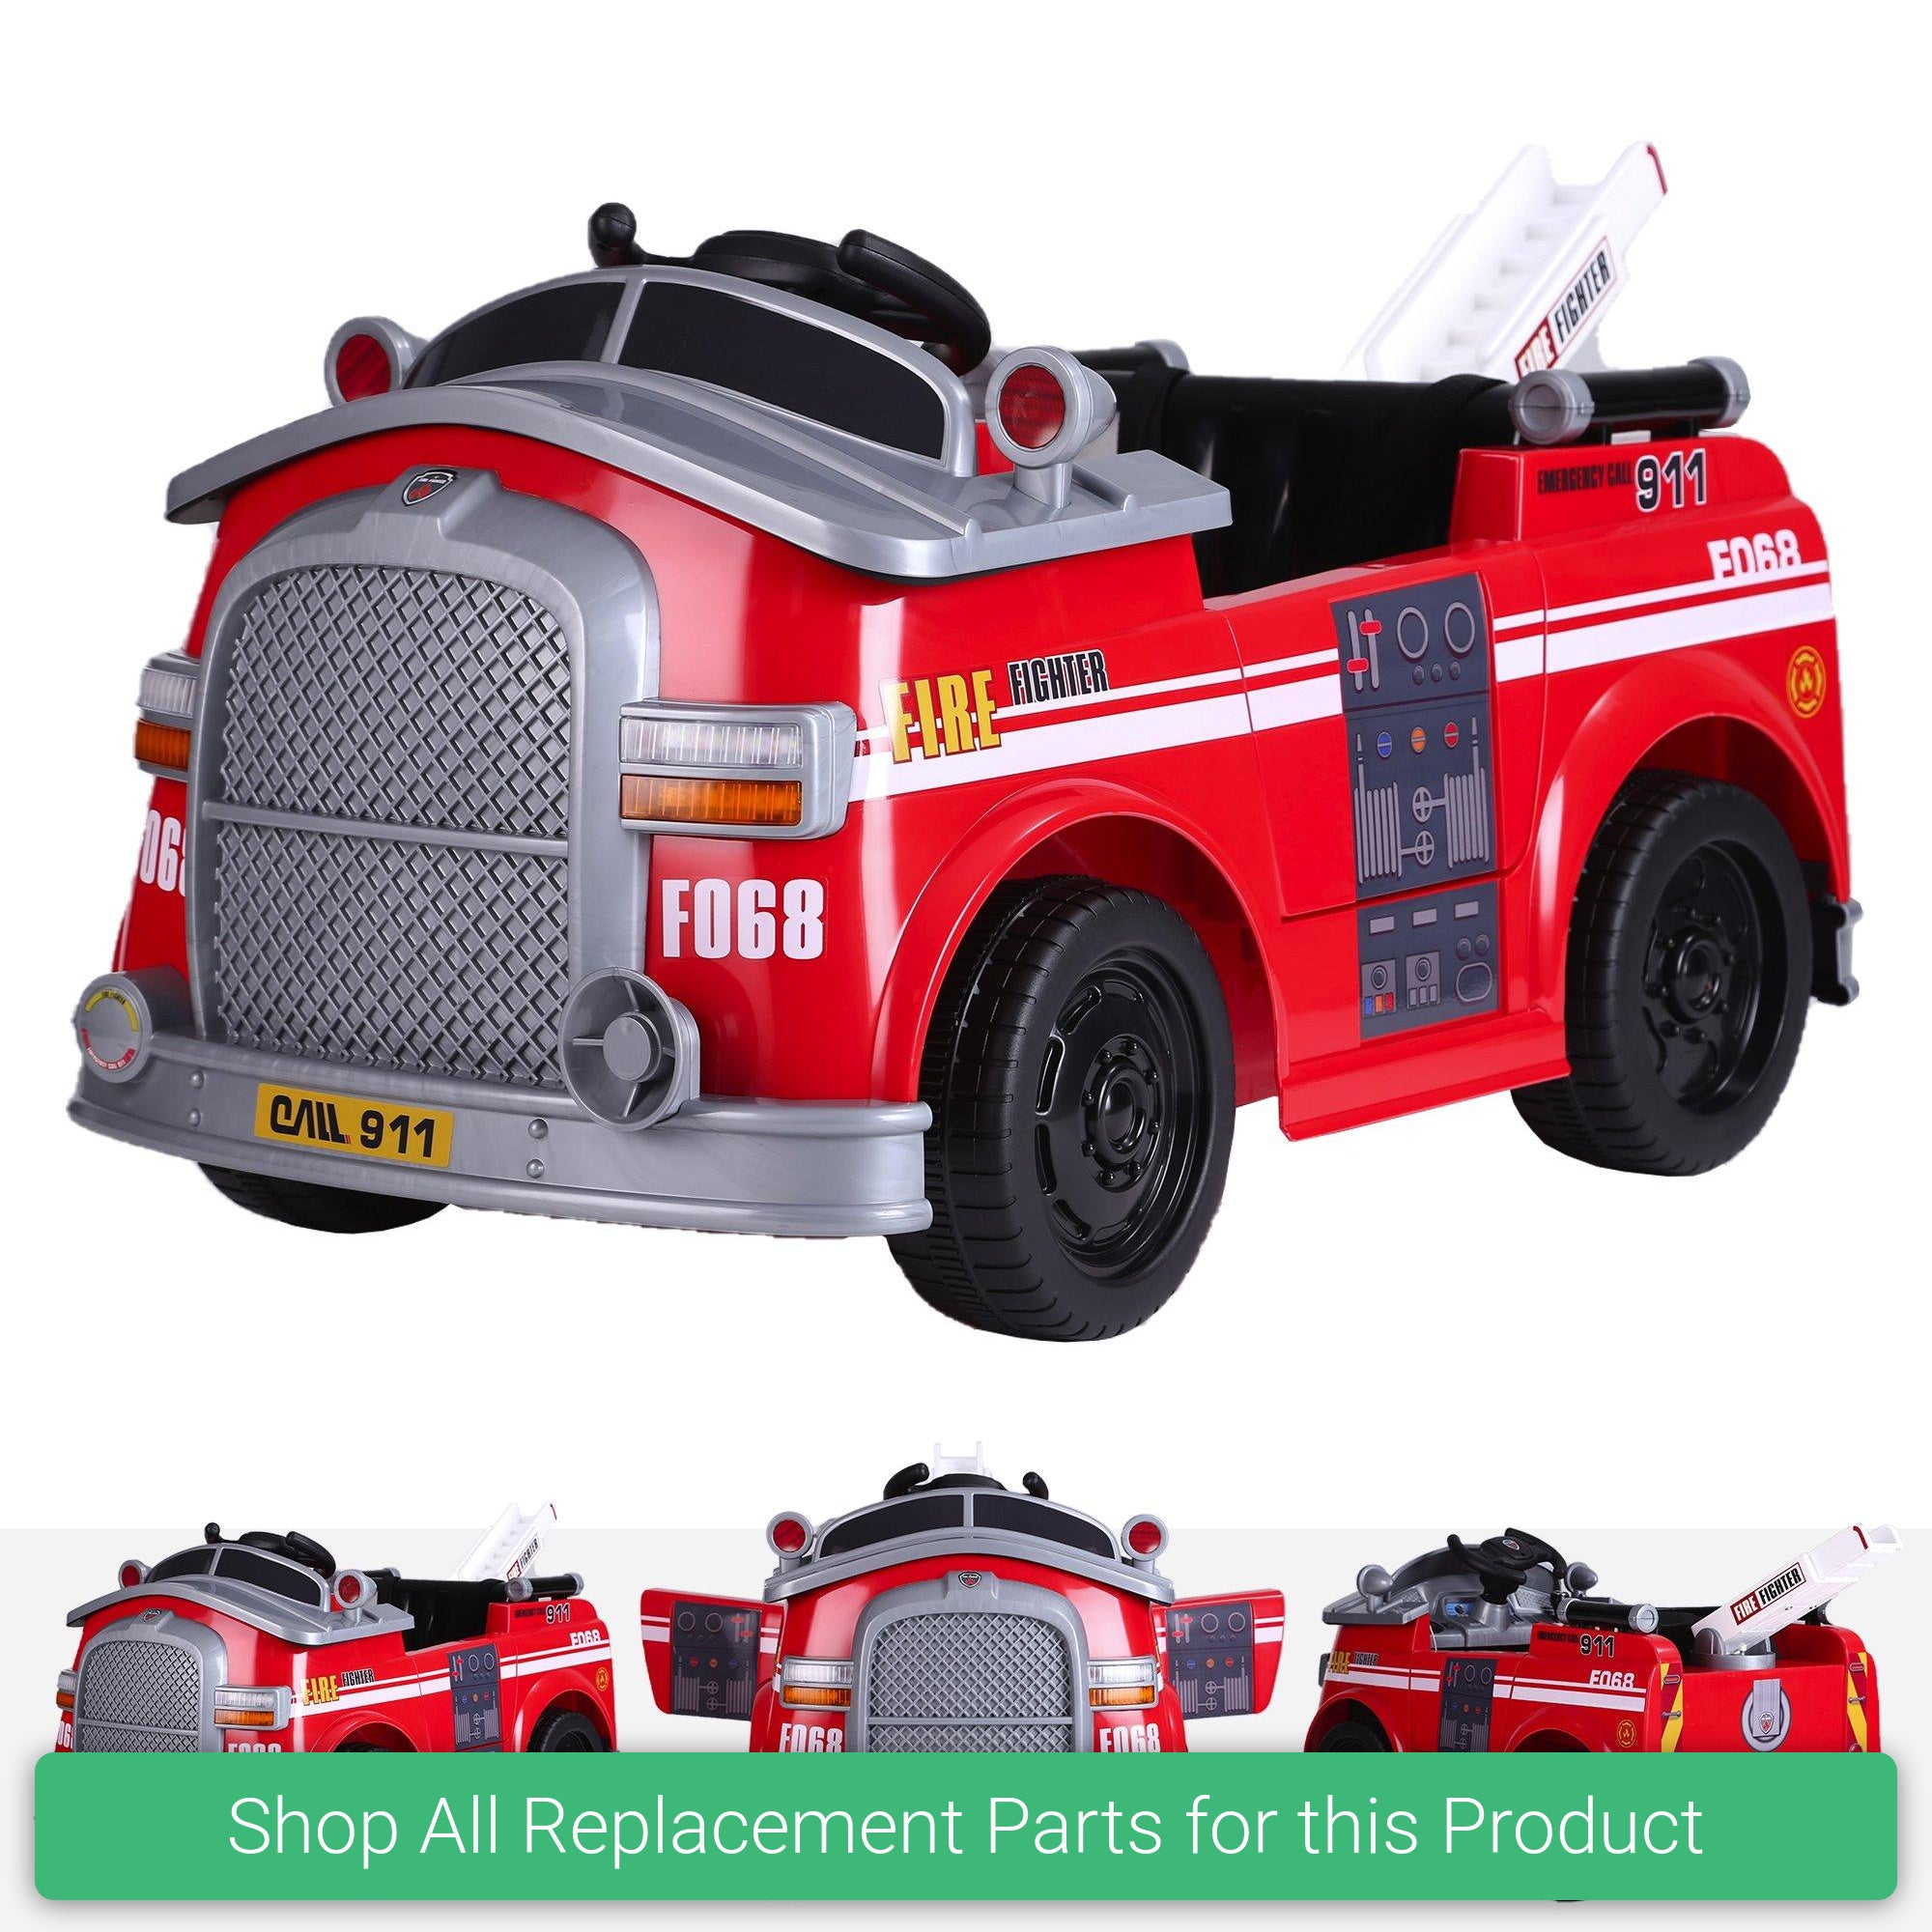 Replacement Parts and Spares for Kids 6v Fire engine mini truck - FIR-6-RED - JJ306